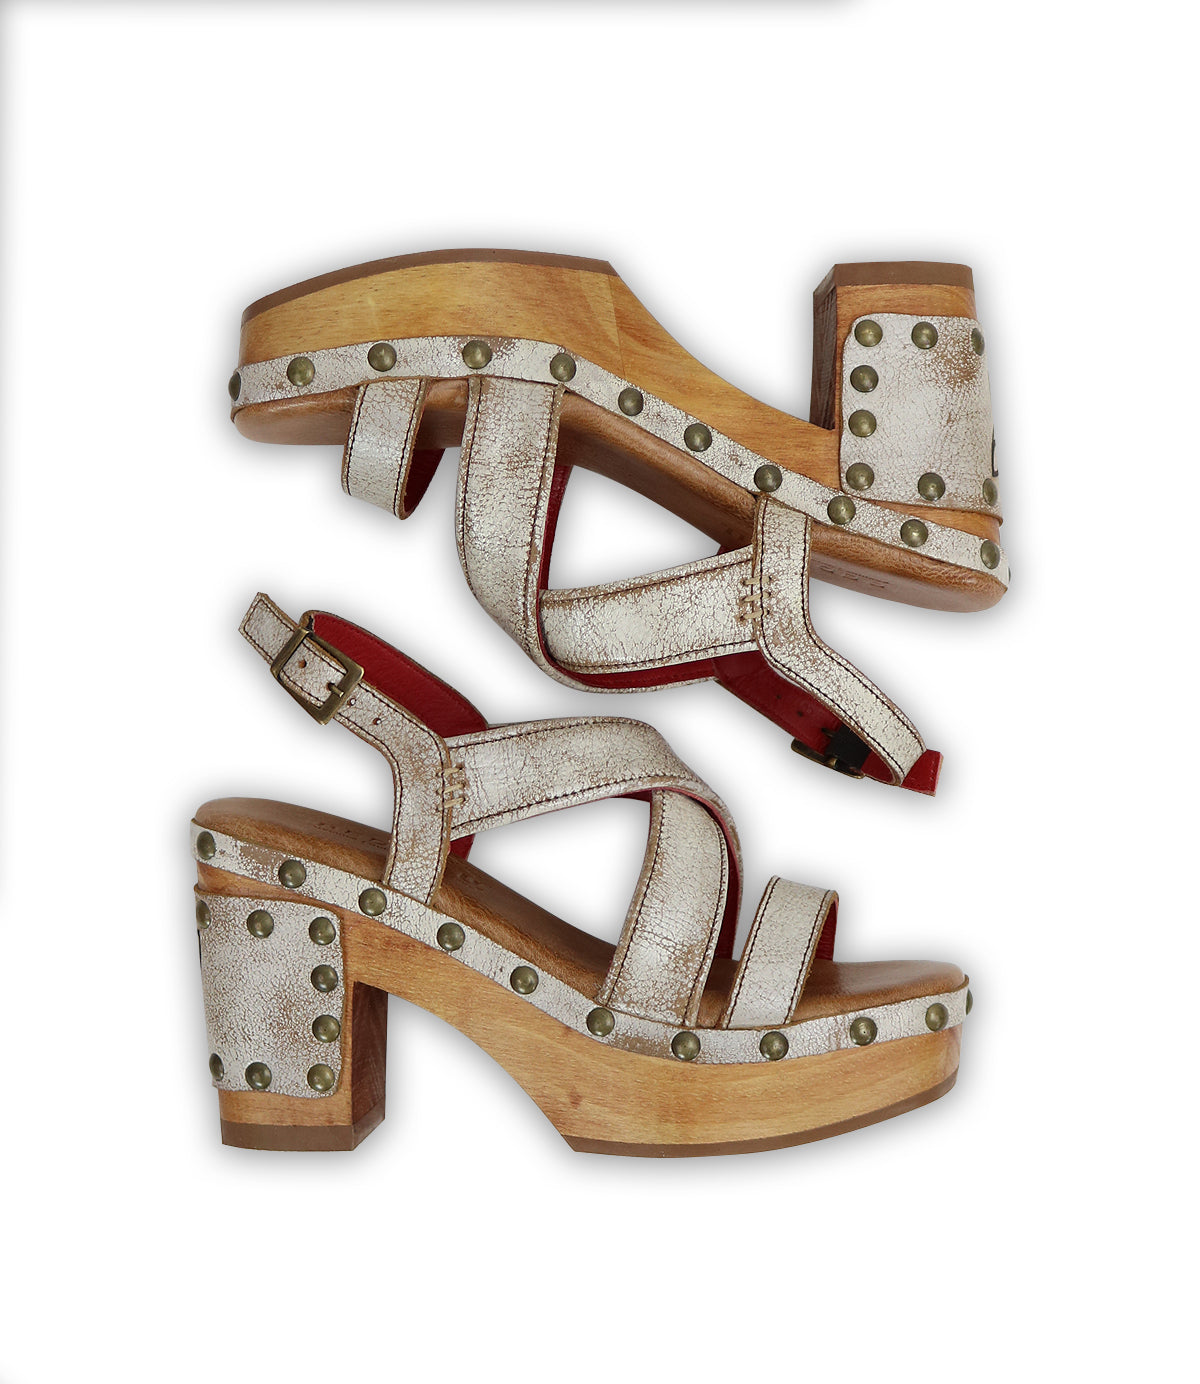 A pair of comfortable white Mediation sandals with studs by Bed Stu.